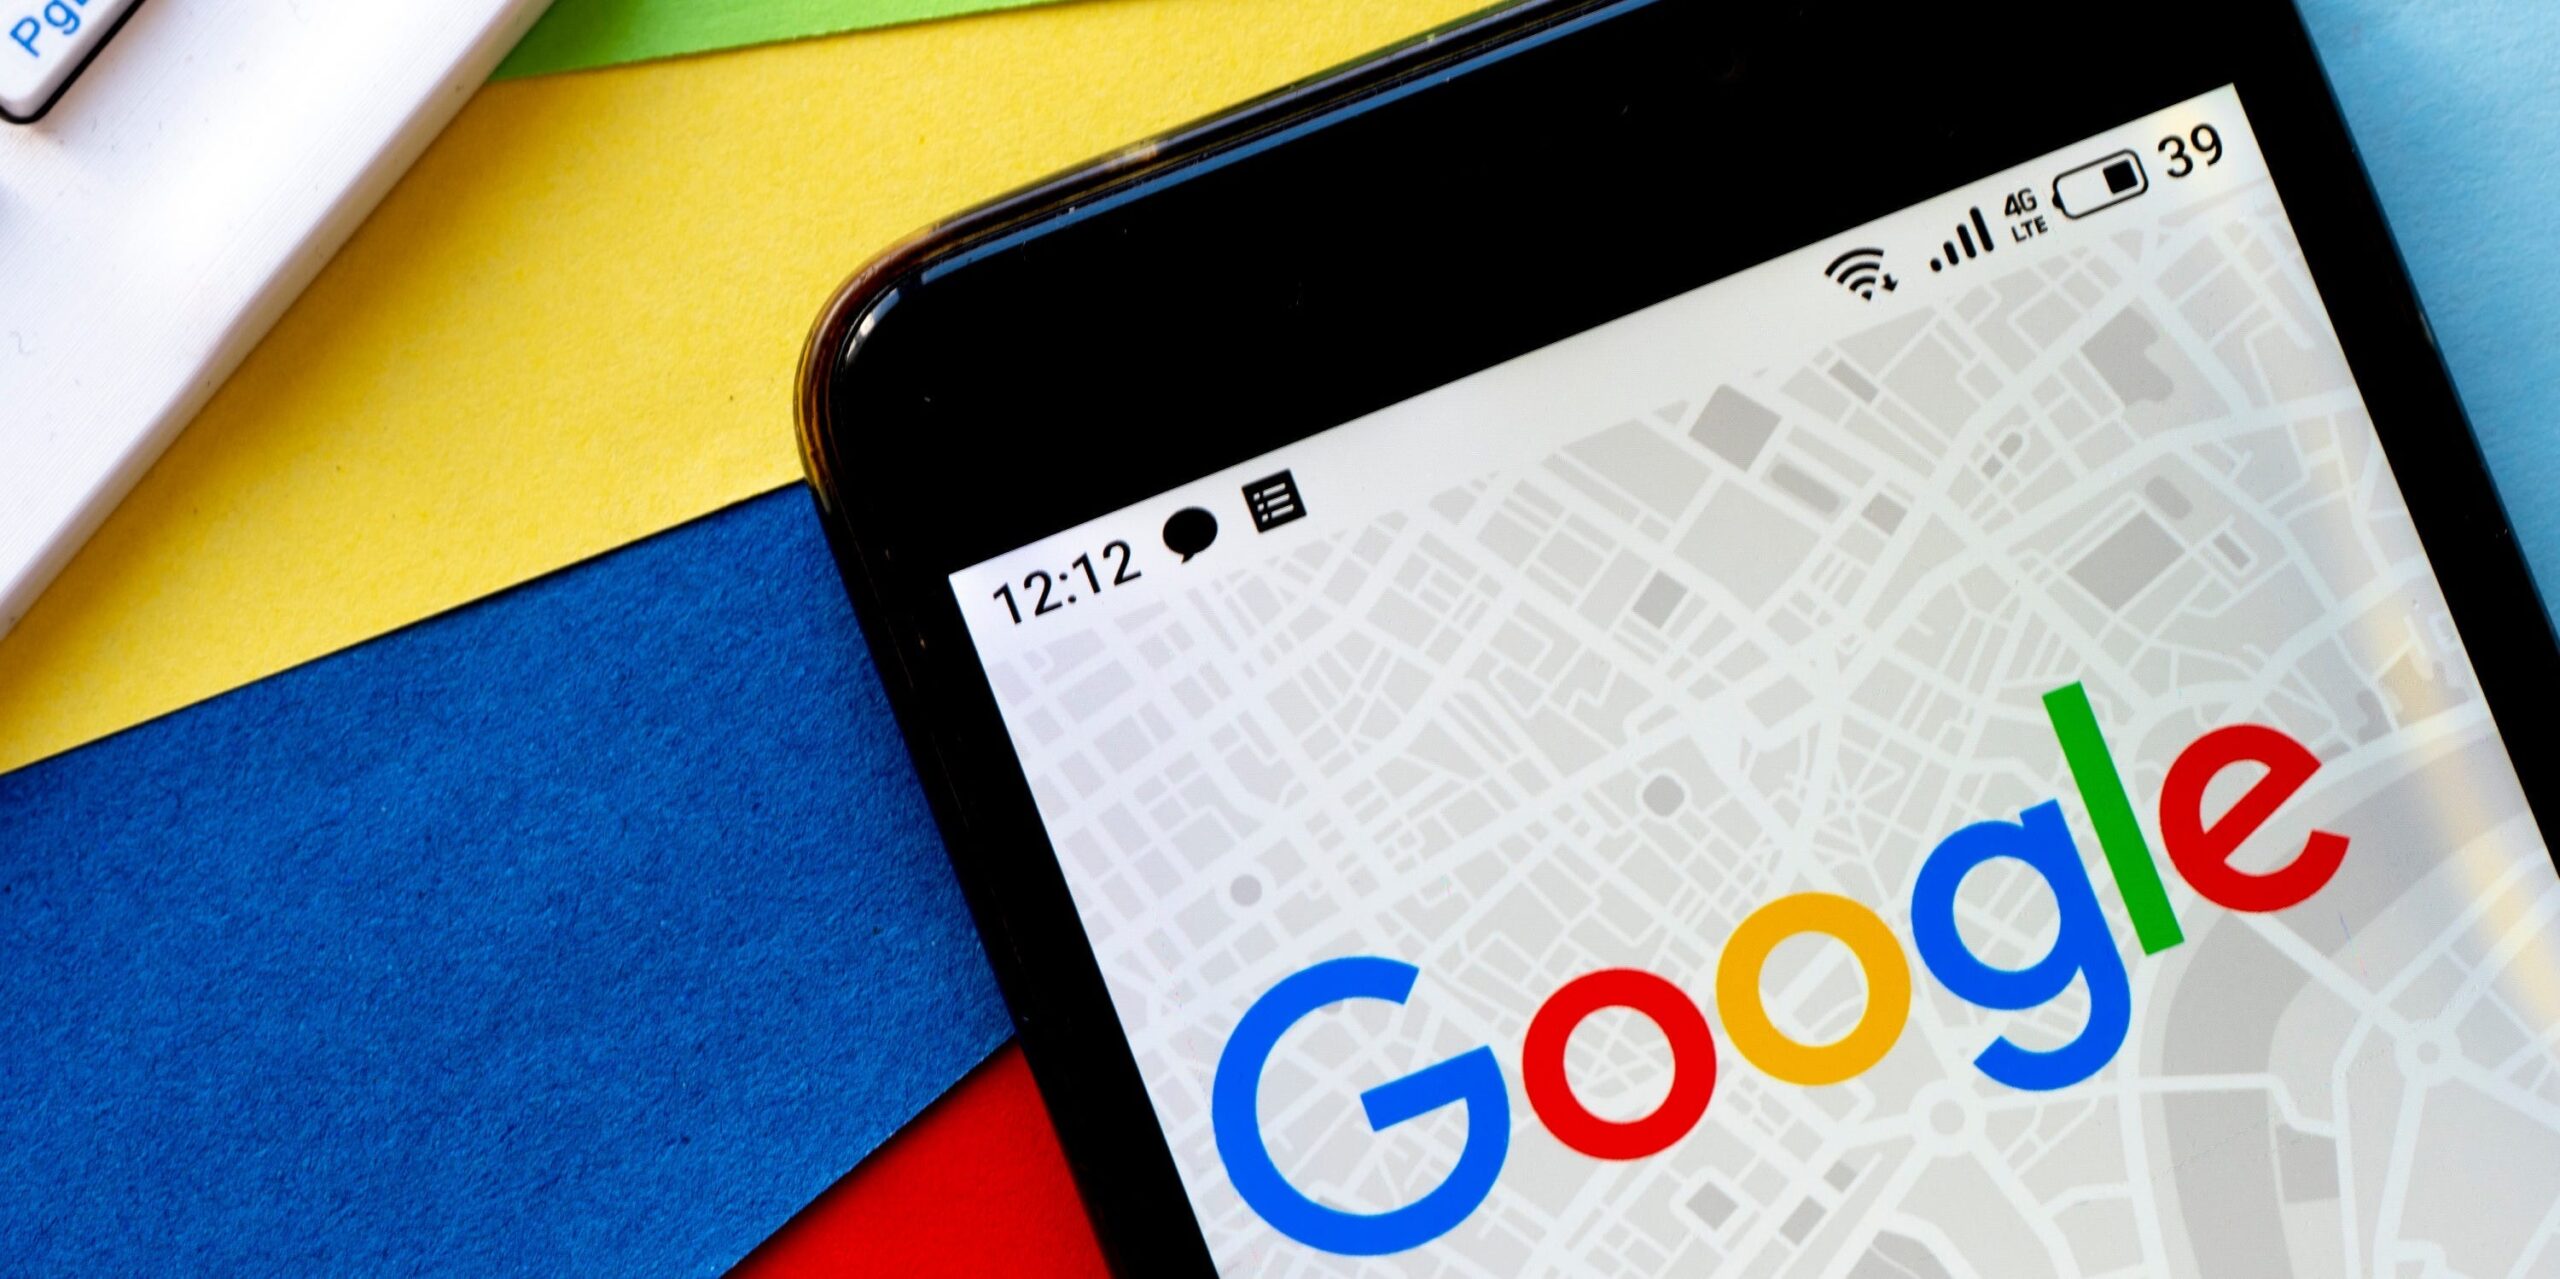 6 Google Privacy Settings You Should Consider Changing